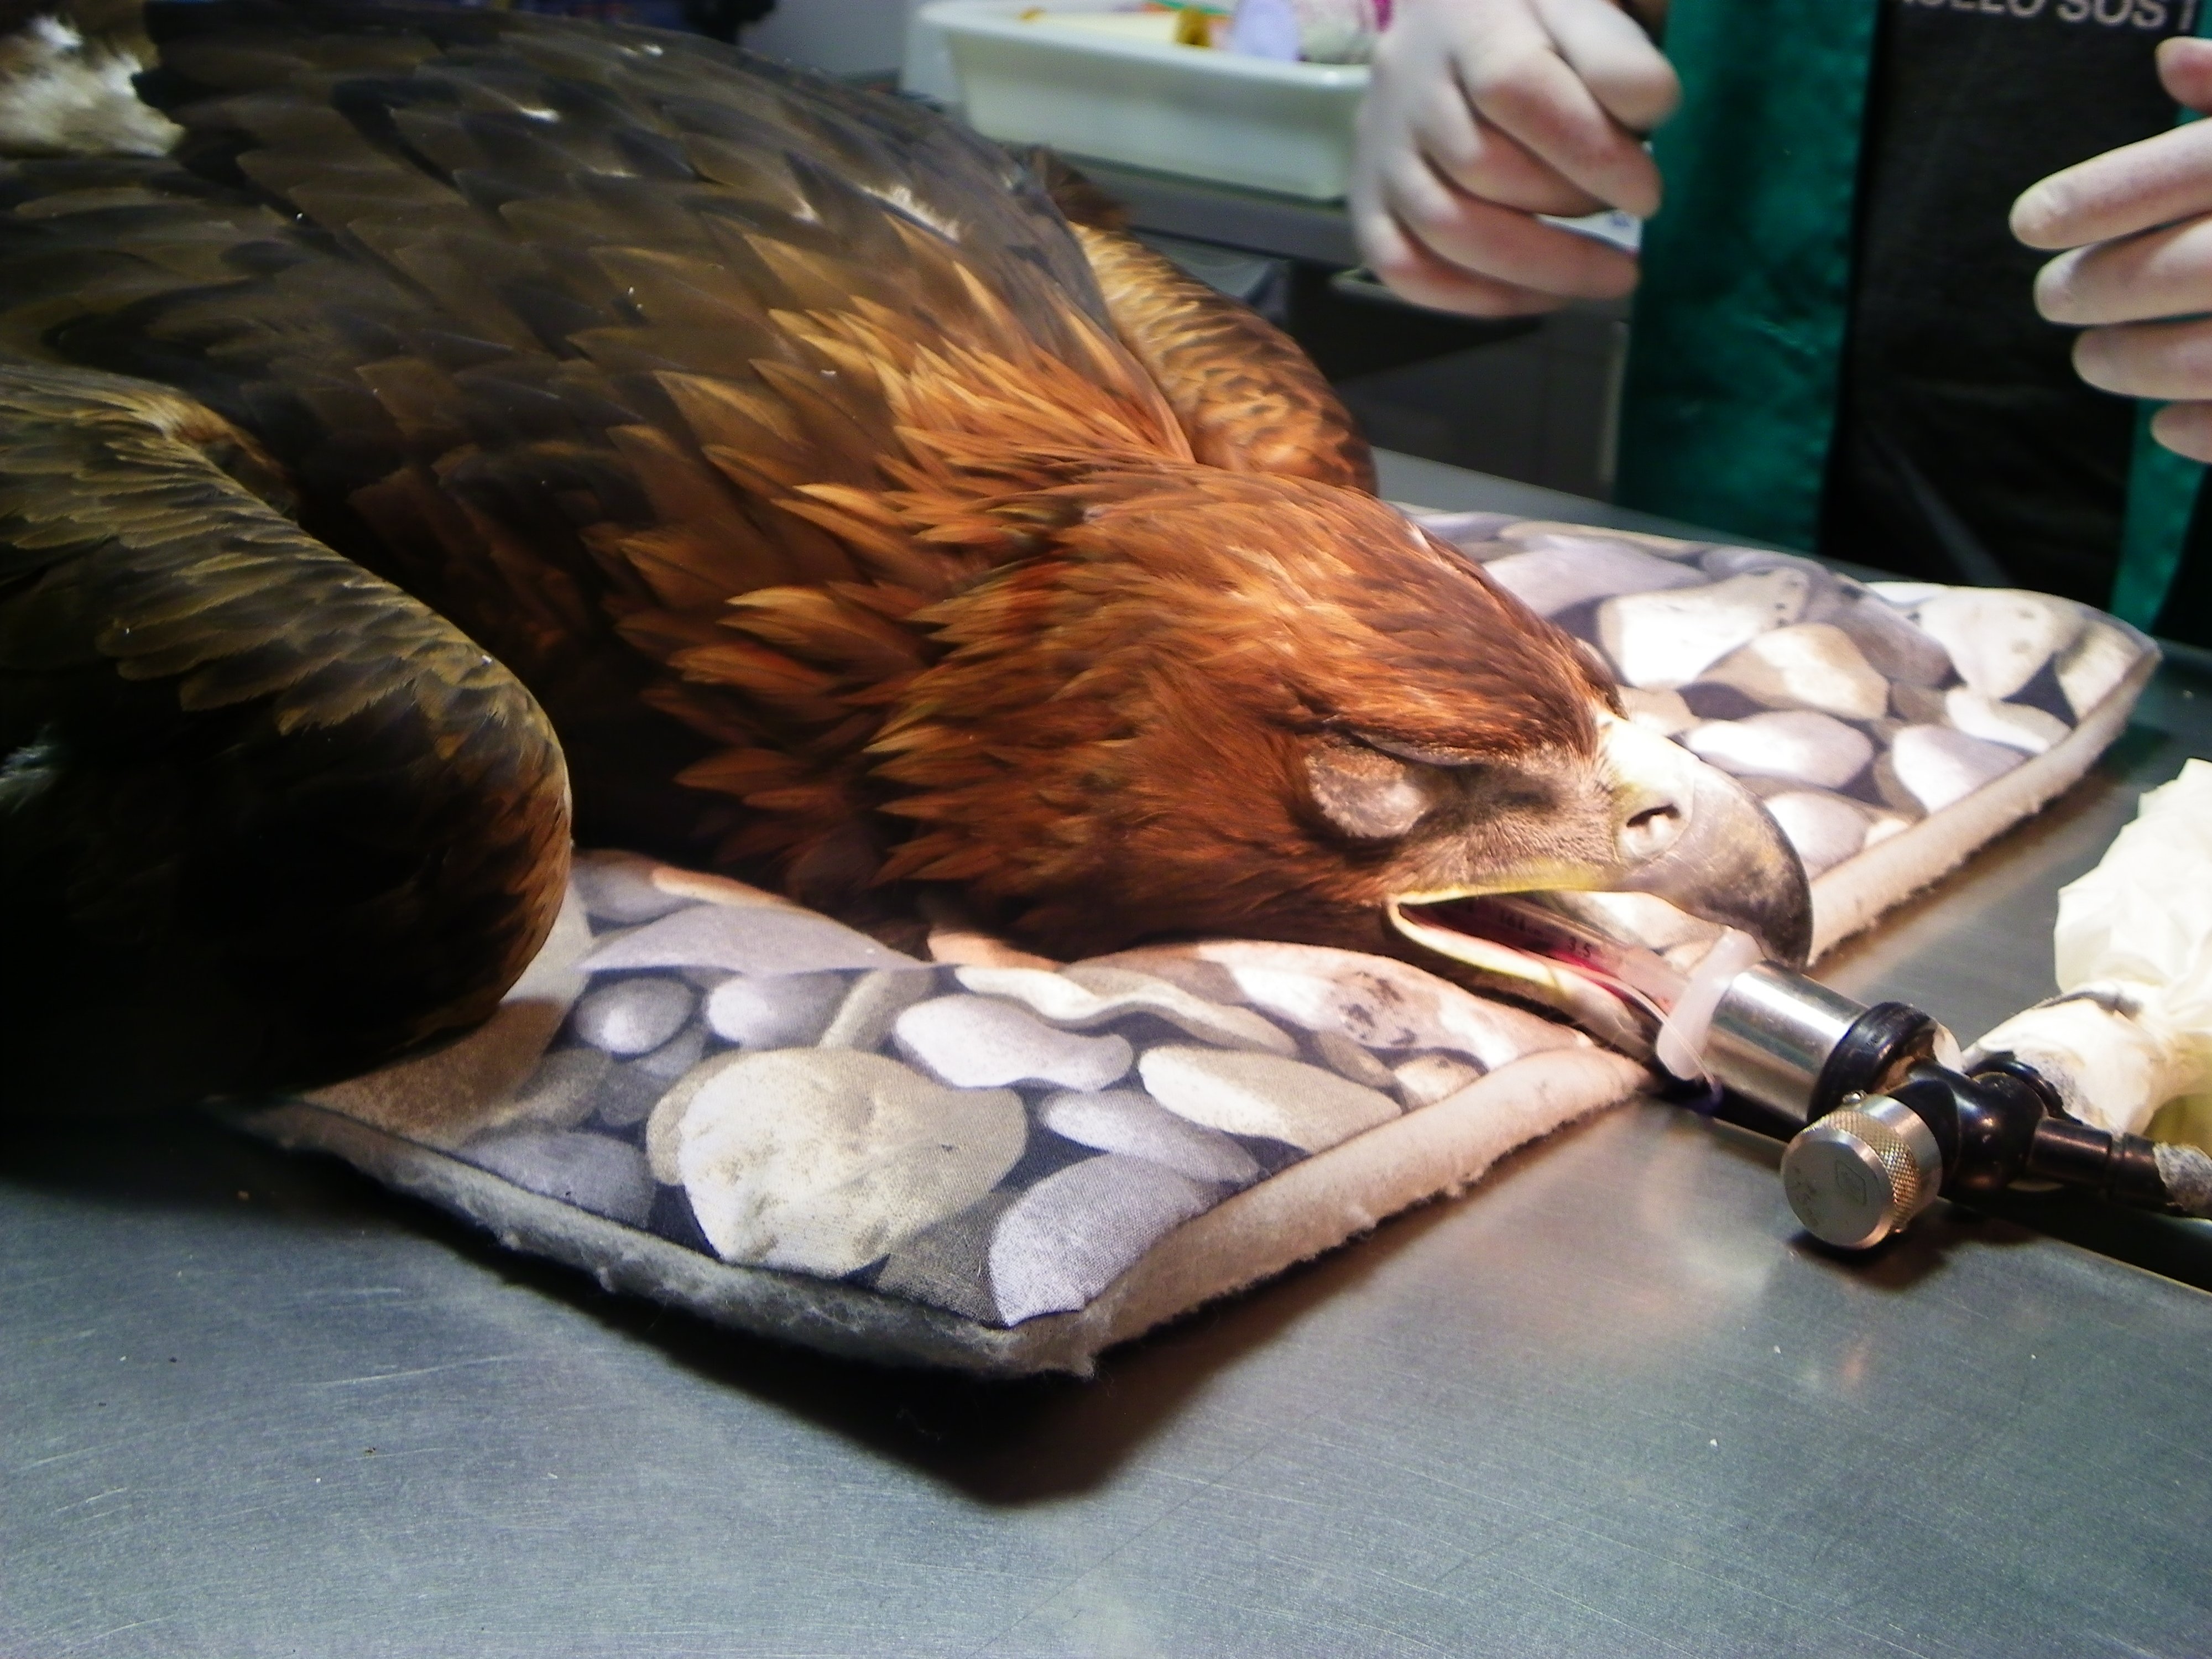 eagle under sedation on the operating table